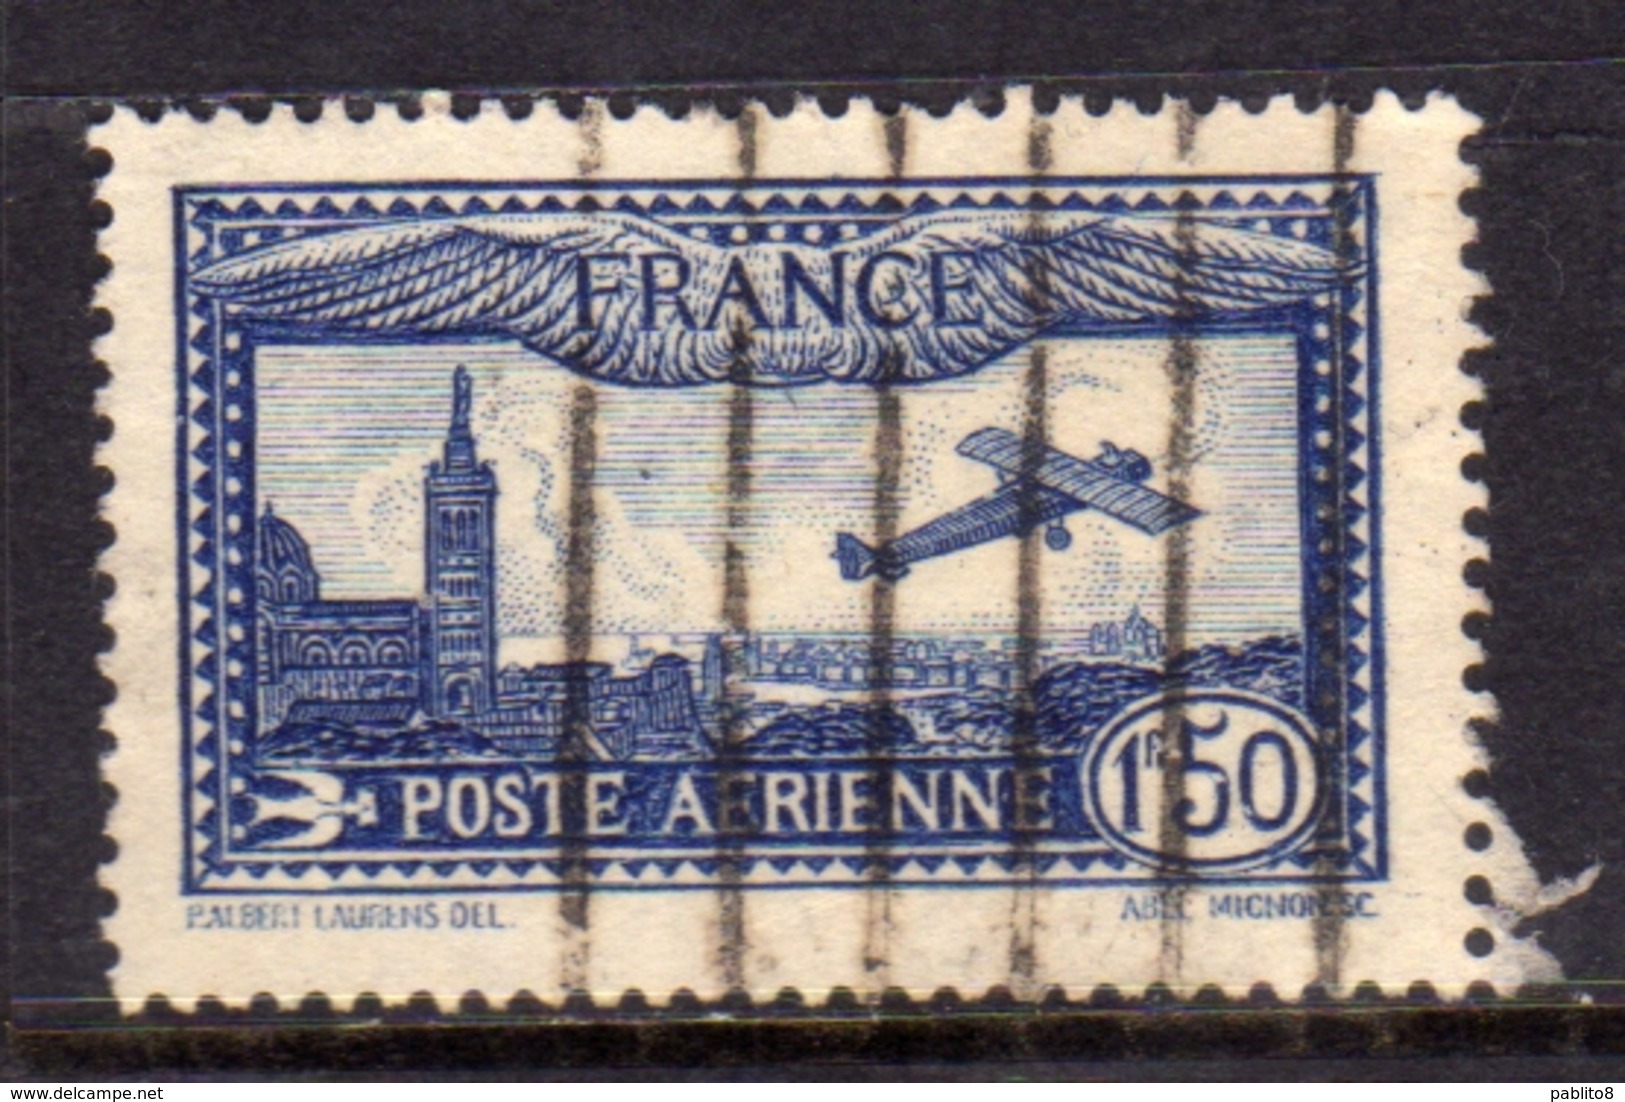 FRANCE FRANCIA 1930 1931 POSTE AERIENNE AIR MAIL AEREA VIEW OF MARSEILLE VUE NOTRE DAME LEFTE 1.50f  OBLITERE' USED - 1927-1959 Afgestempeld